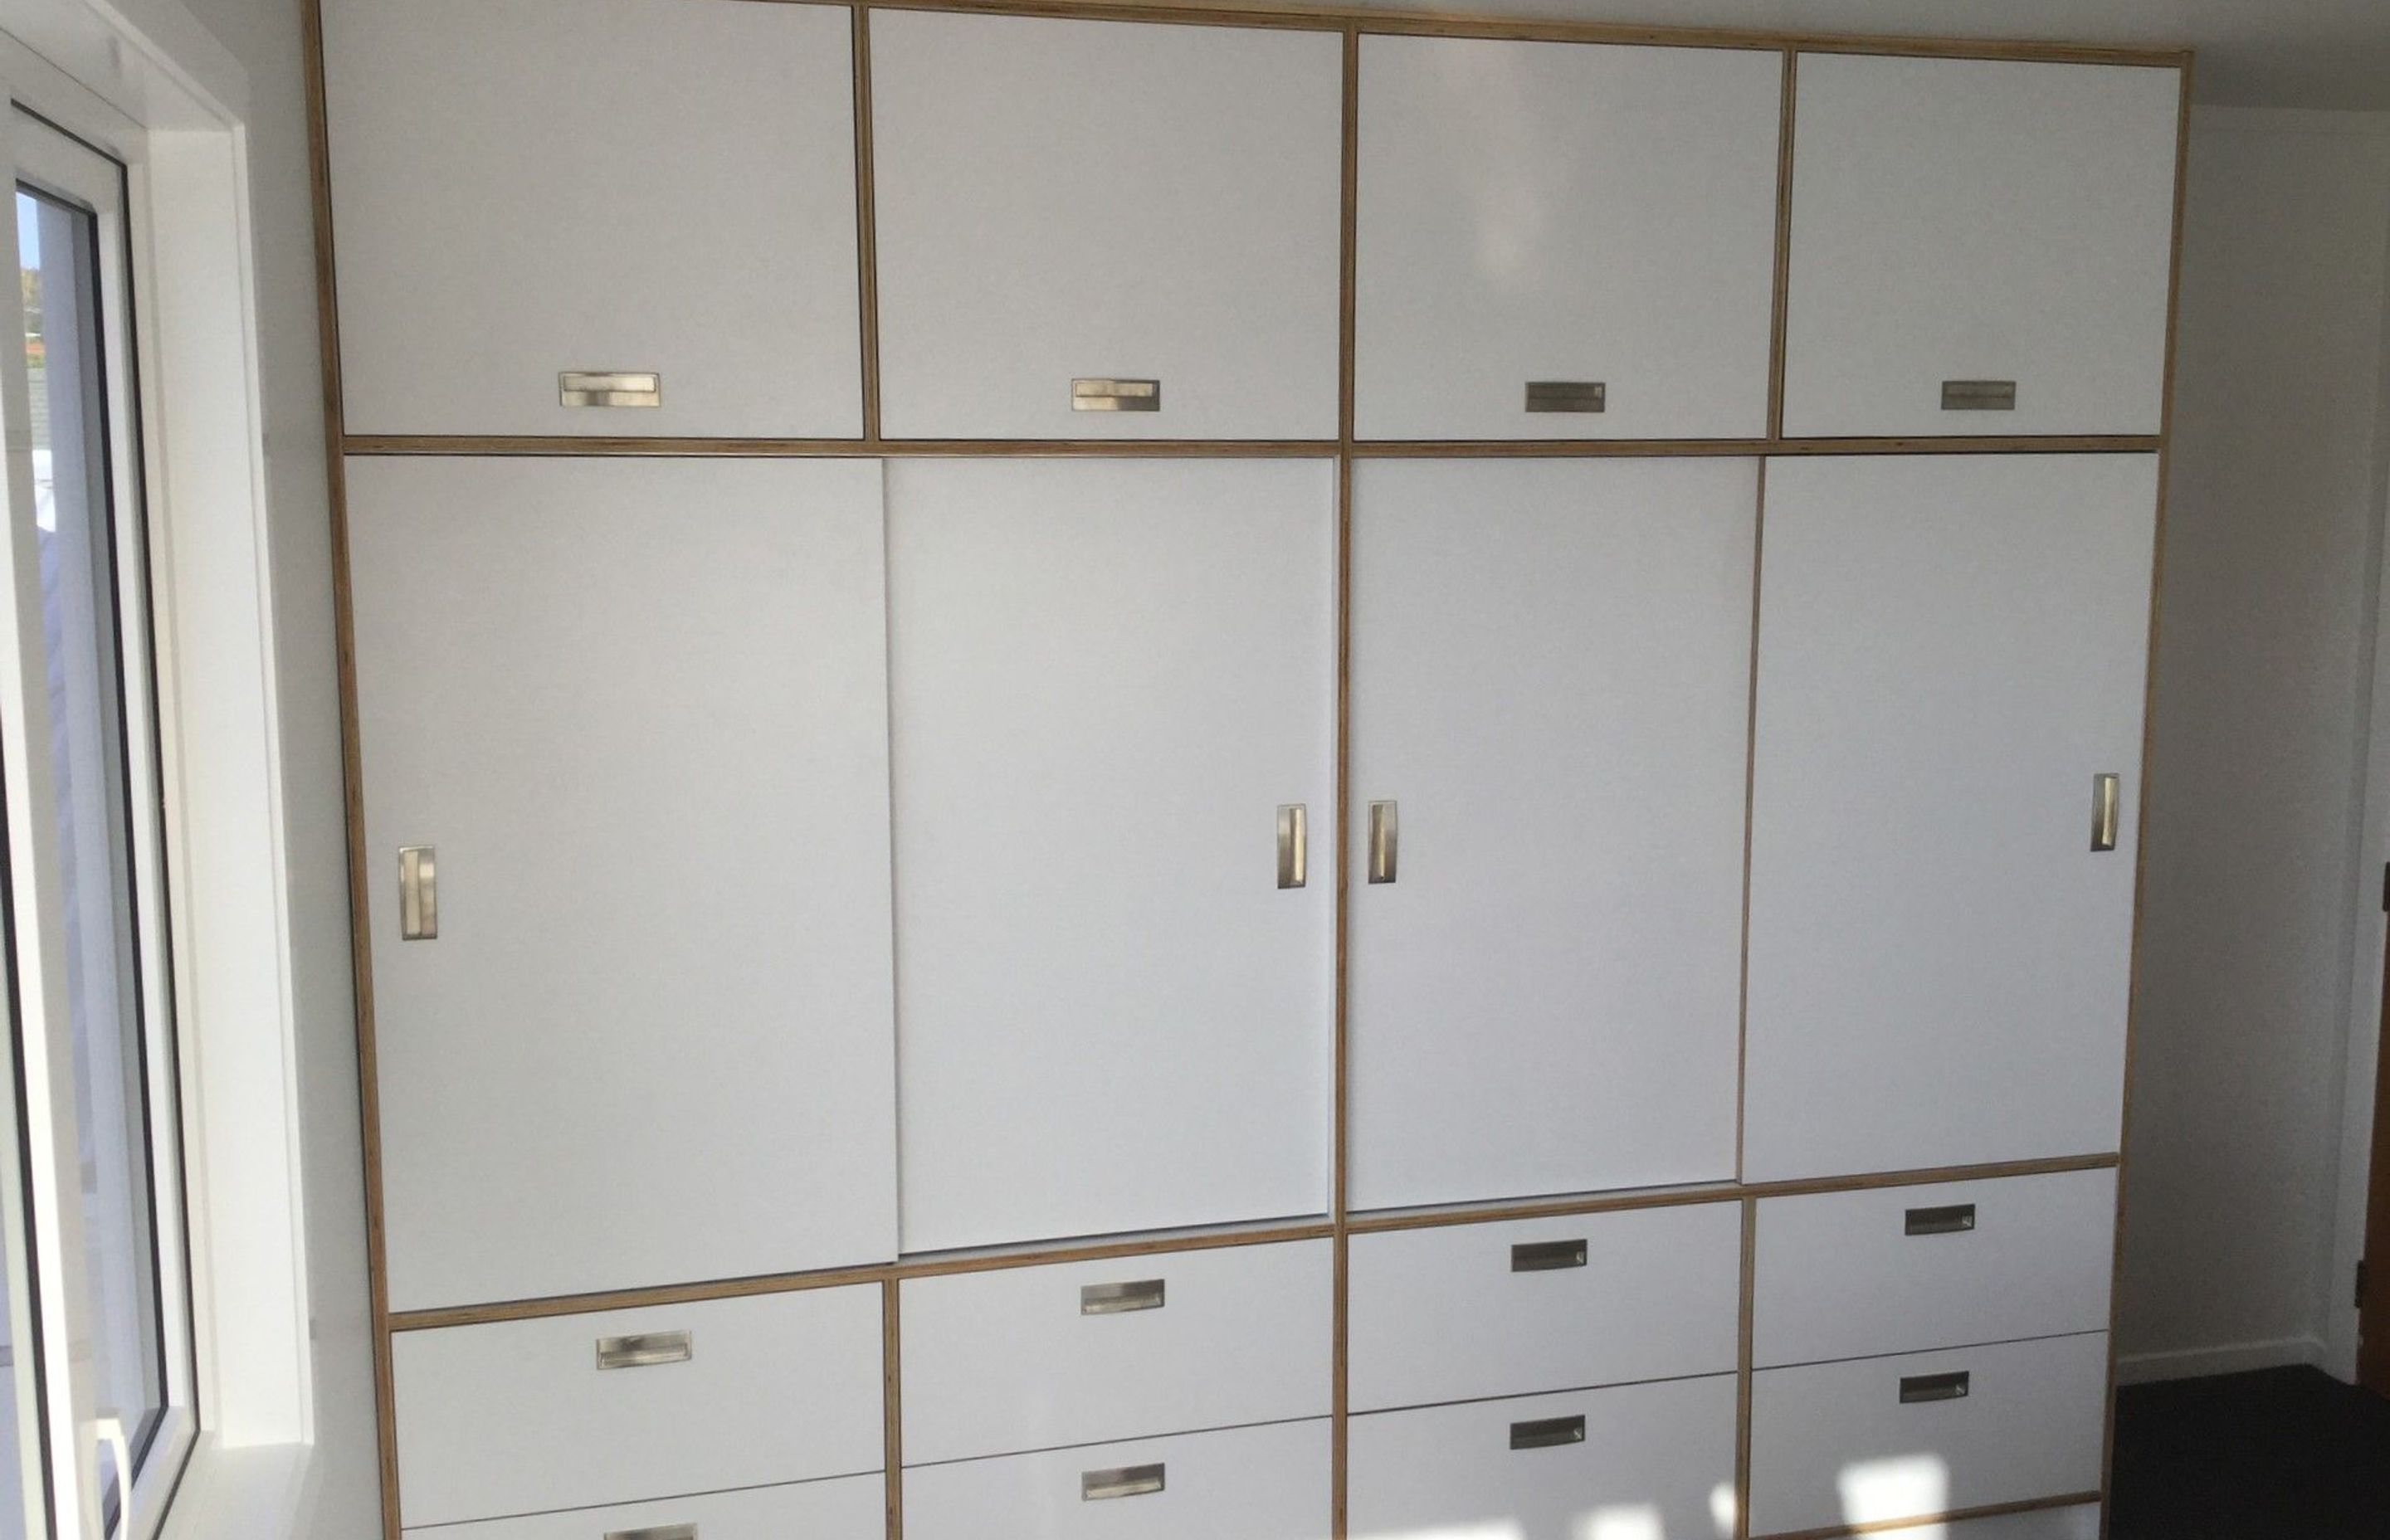 Custom-built wardrobe amd drawers made from HPL italia on Birch ply from Plymasters. Recessed Brushed Nickel Arezzo Handles by Archant. Other door hardware by Hafele.